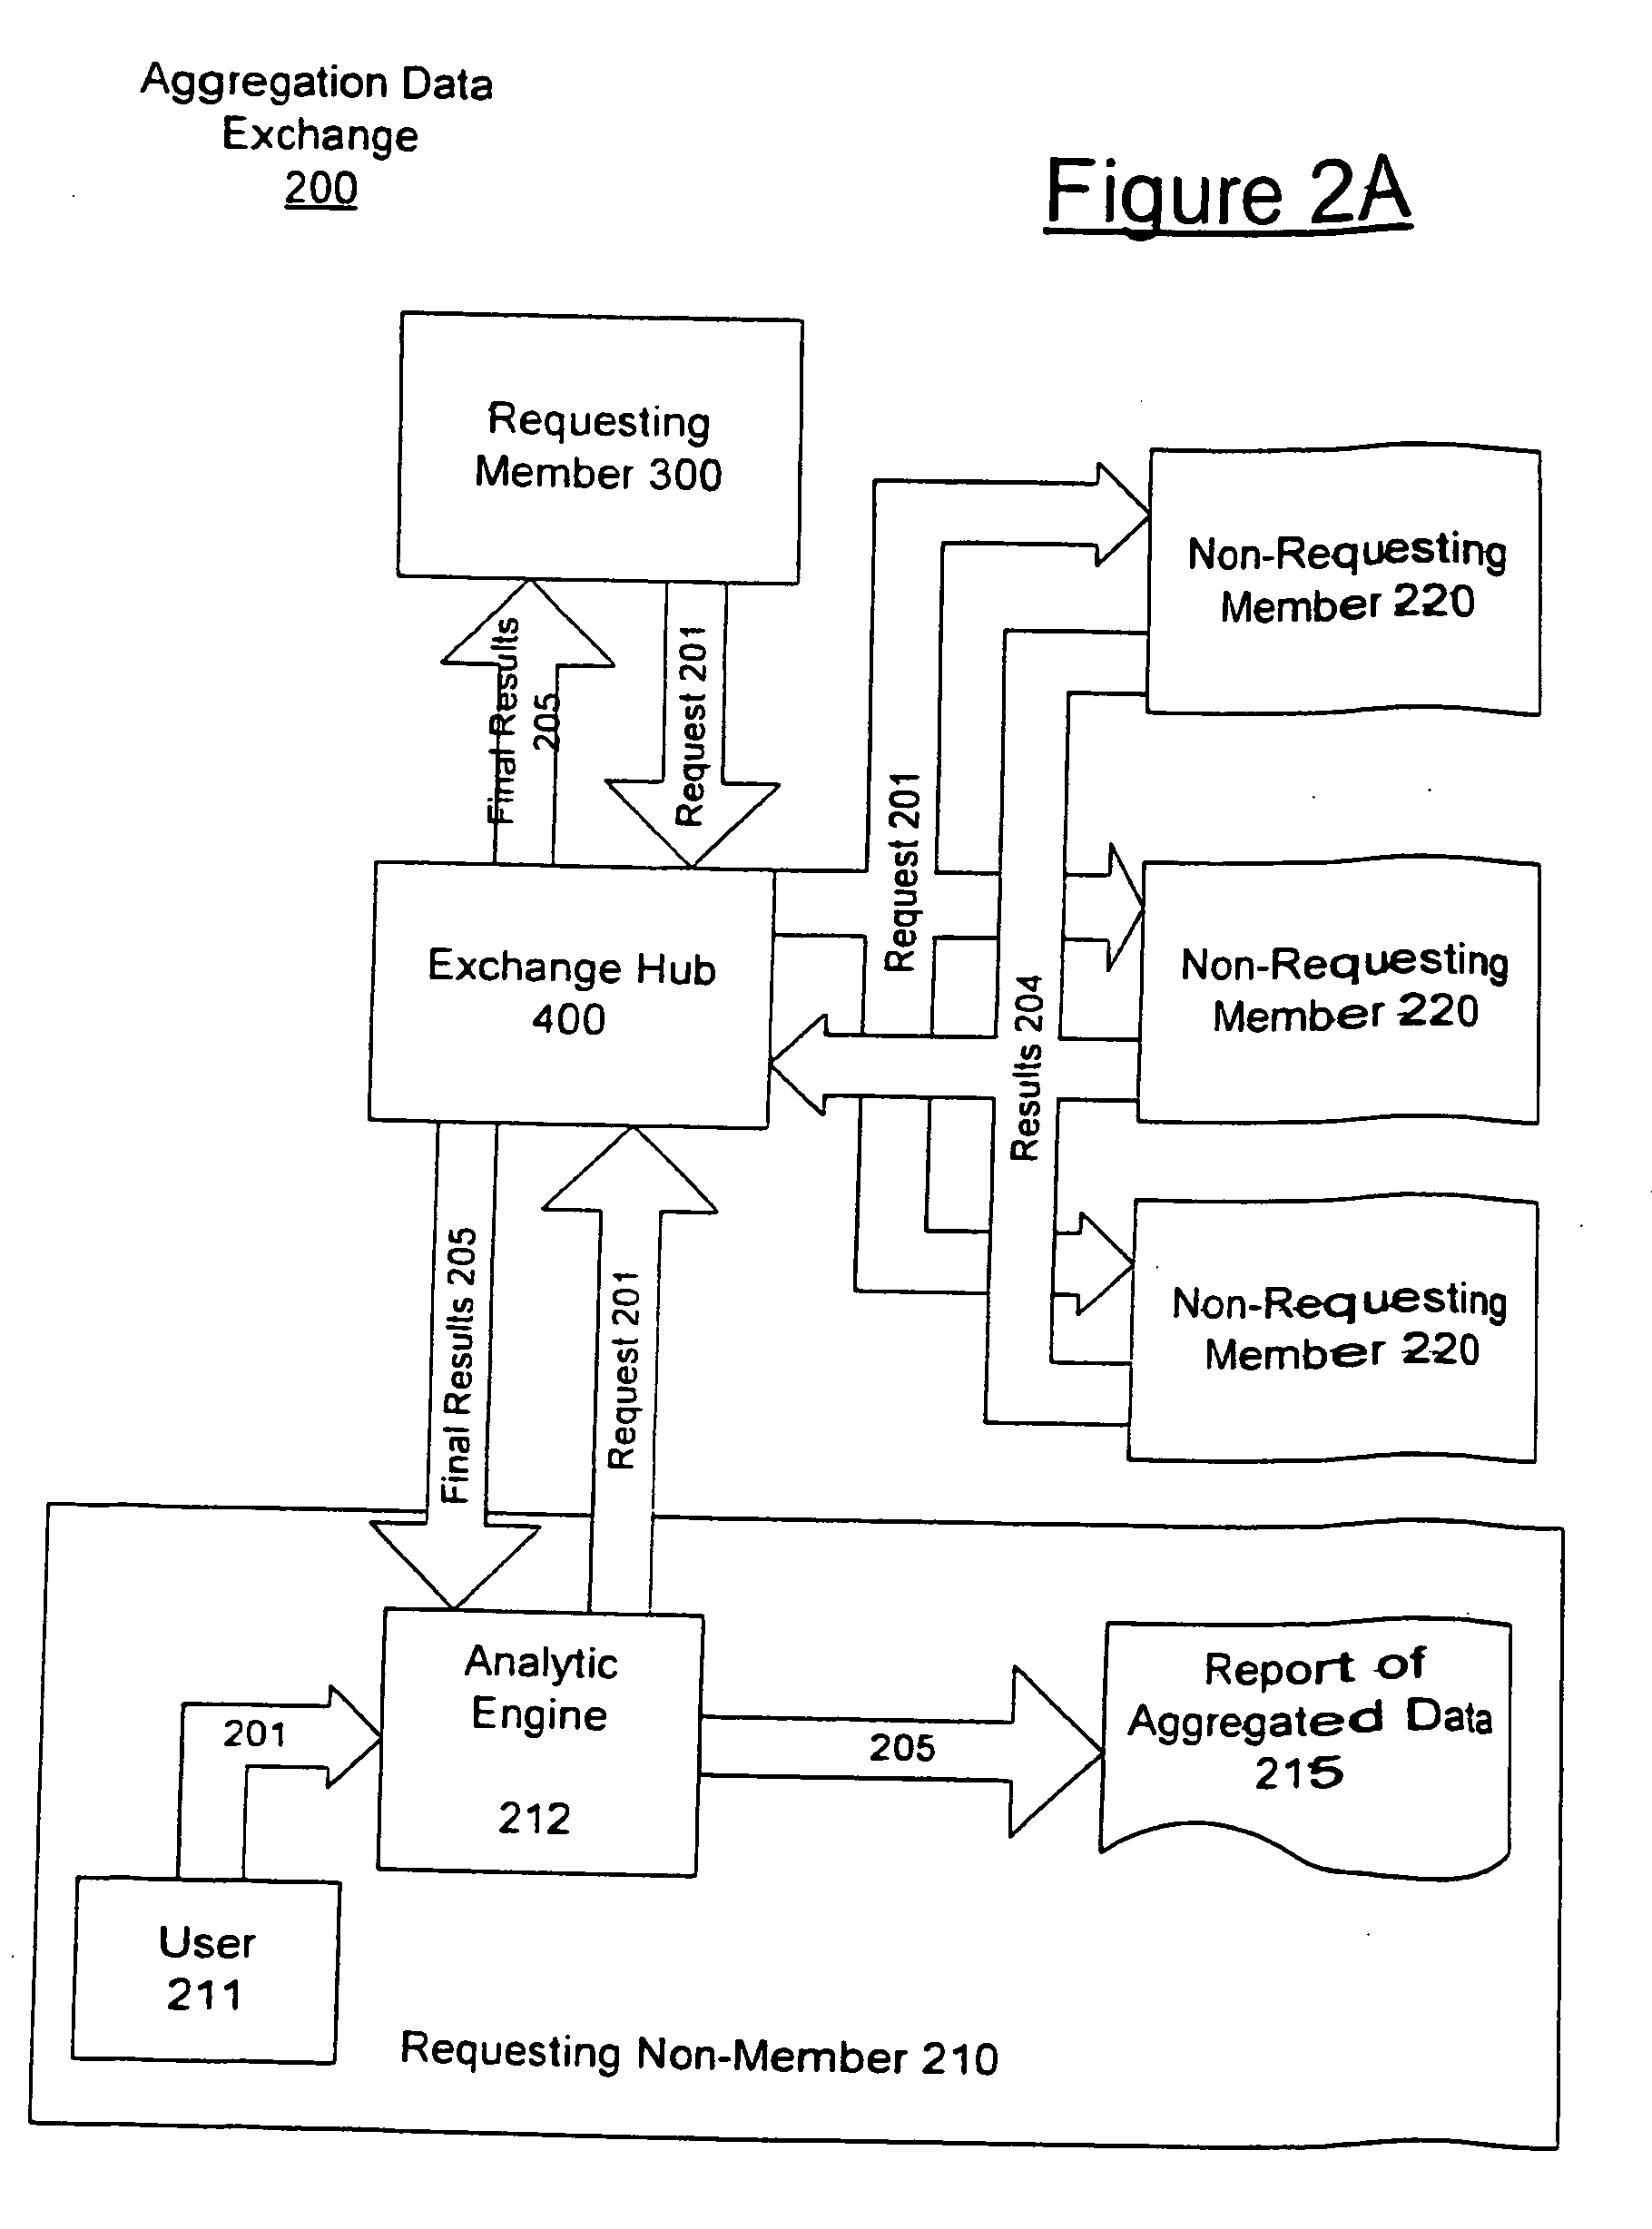 System and method for aggregation and analysis of information from multiple disparate sources while assuring source and record anonymity using an exchange hub